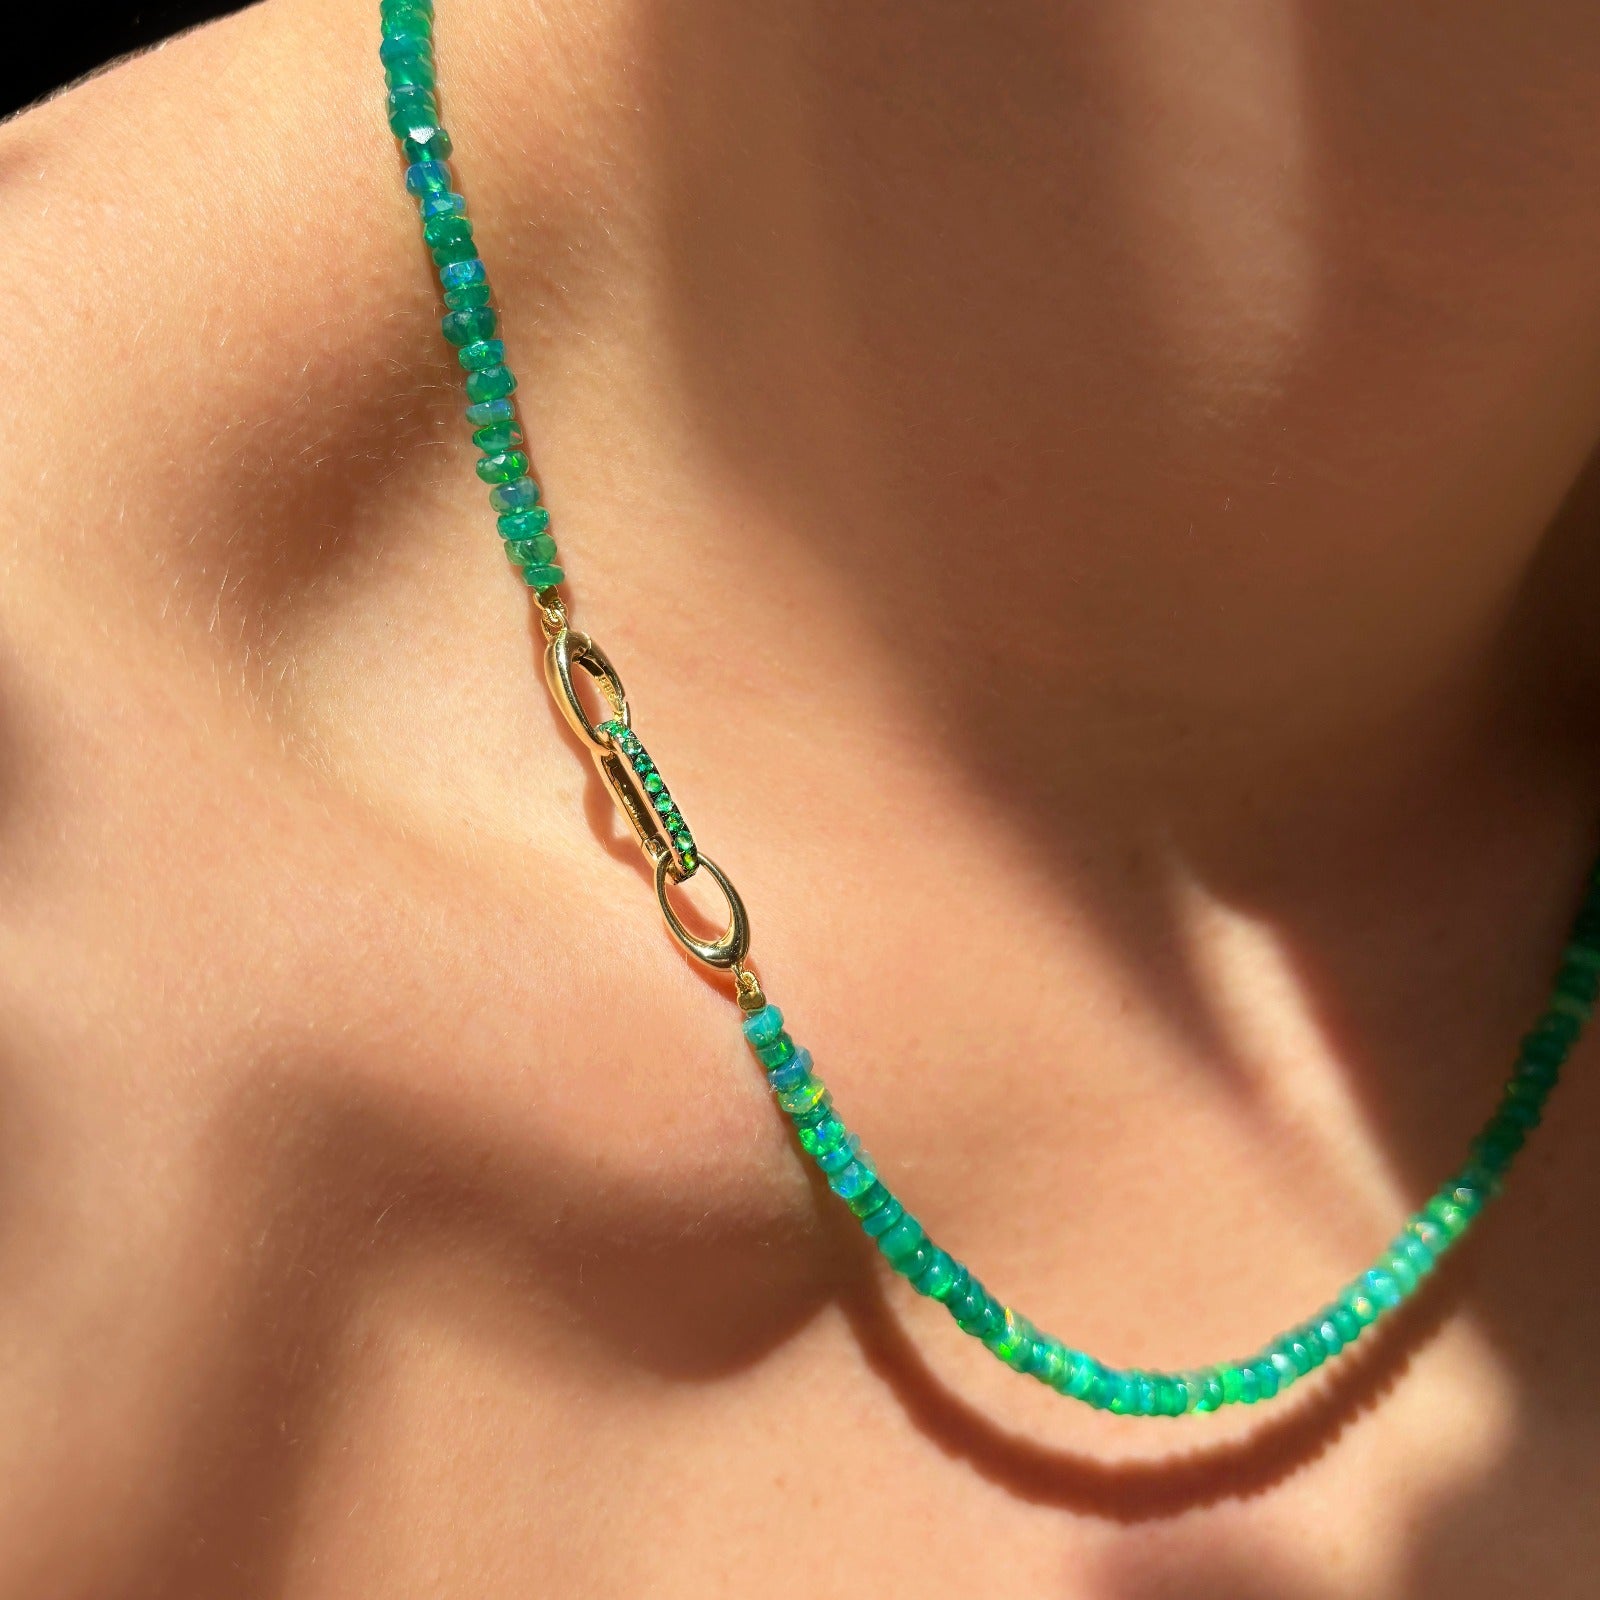 14k yellow gold oval locking charm with green stones styled on a neck locked onto oval clasps of a beaded necklace.